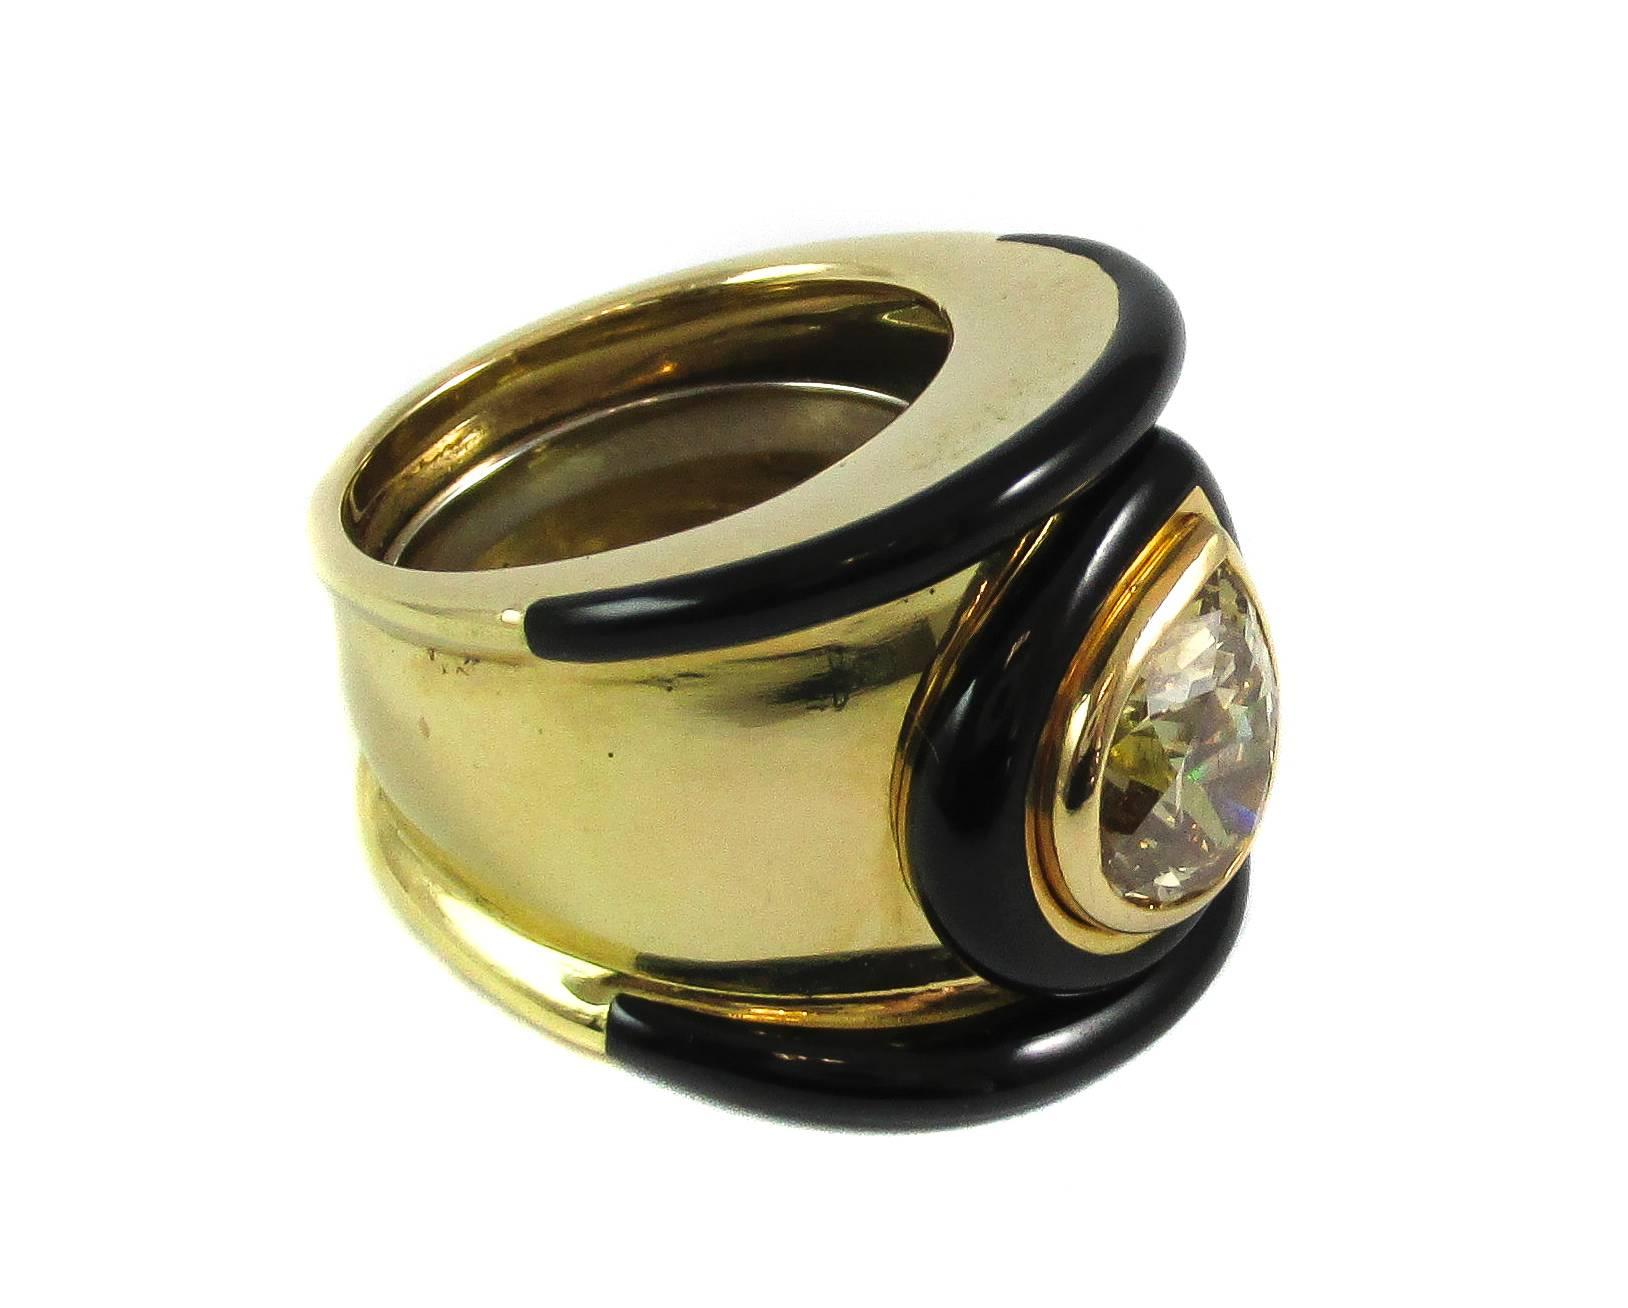 Extraordinary black enamel 18 Karat yellow gold and pear shape diamond ring, ca 1980. This “out of the box“ design, which David Webb is known for, features a lively cognac colored diamond set sideways in a gold bezel and accented by a bezel of black